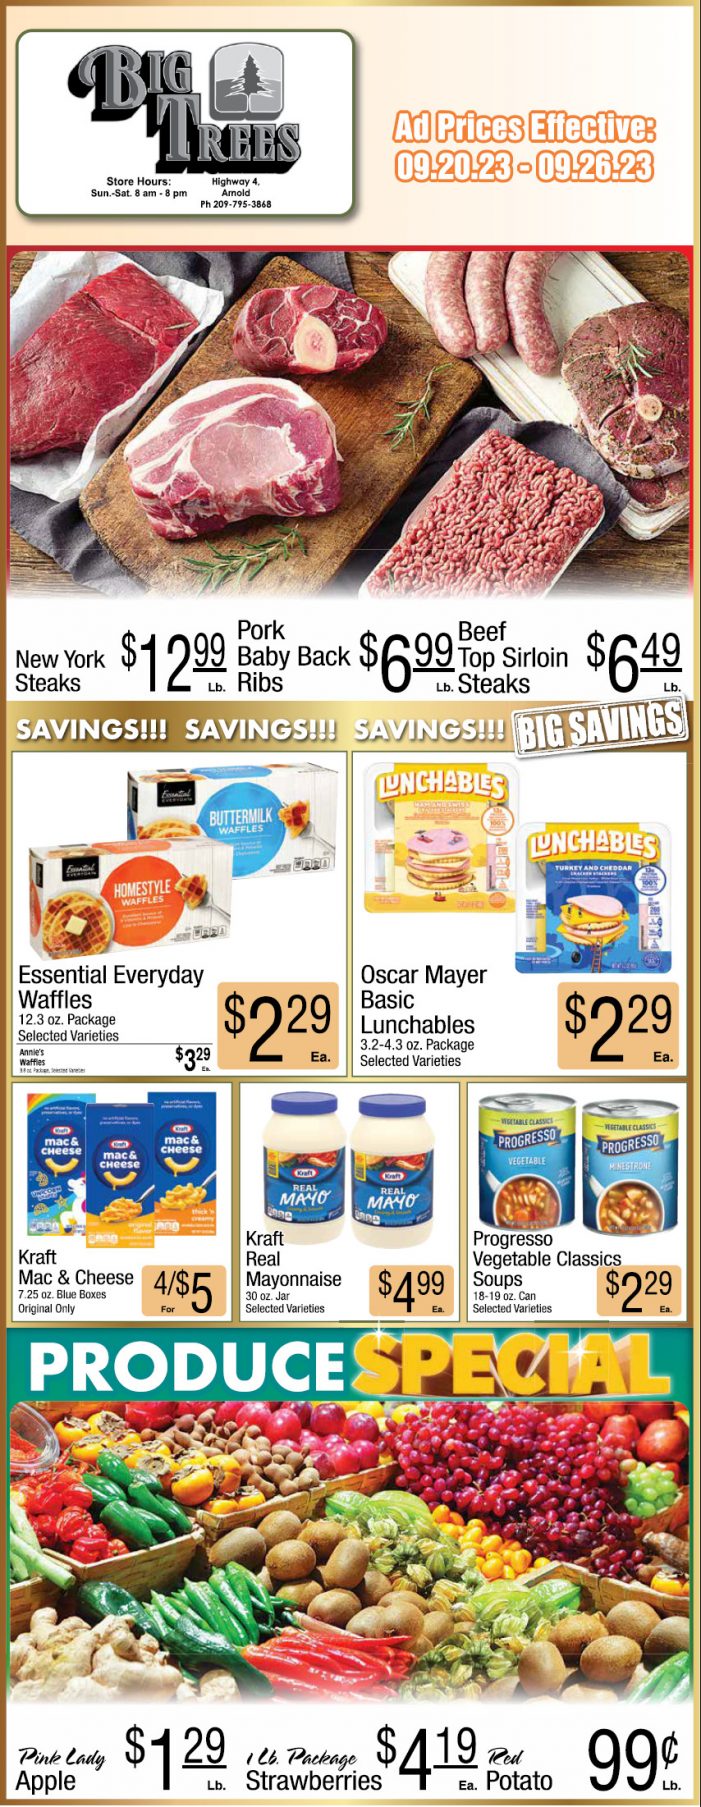 Big Trees Market Weekly Ad, Grocery, Produce, Meat & Deli Specials Through September 26th!  Shop Local & Save!